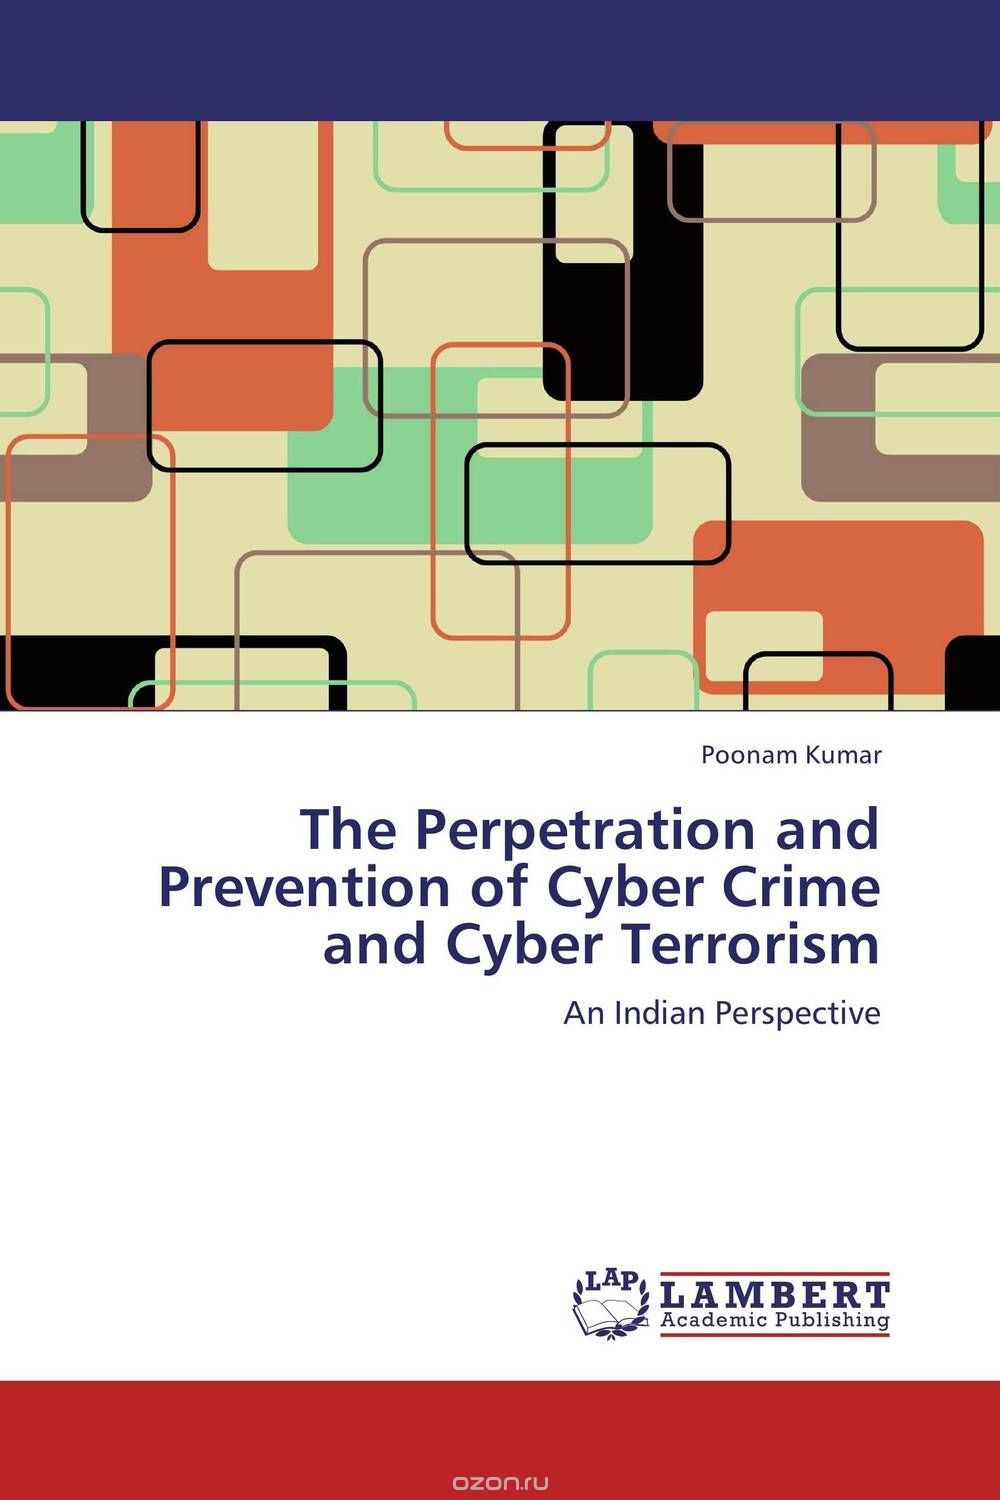 Скачать книгу "The Perpetration and Prevention of Cyber Crime and Cyber Terrorism"